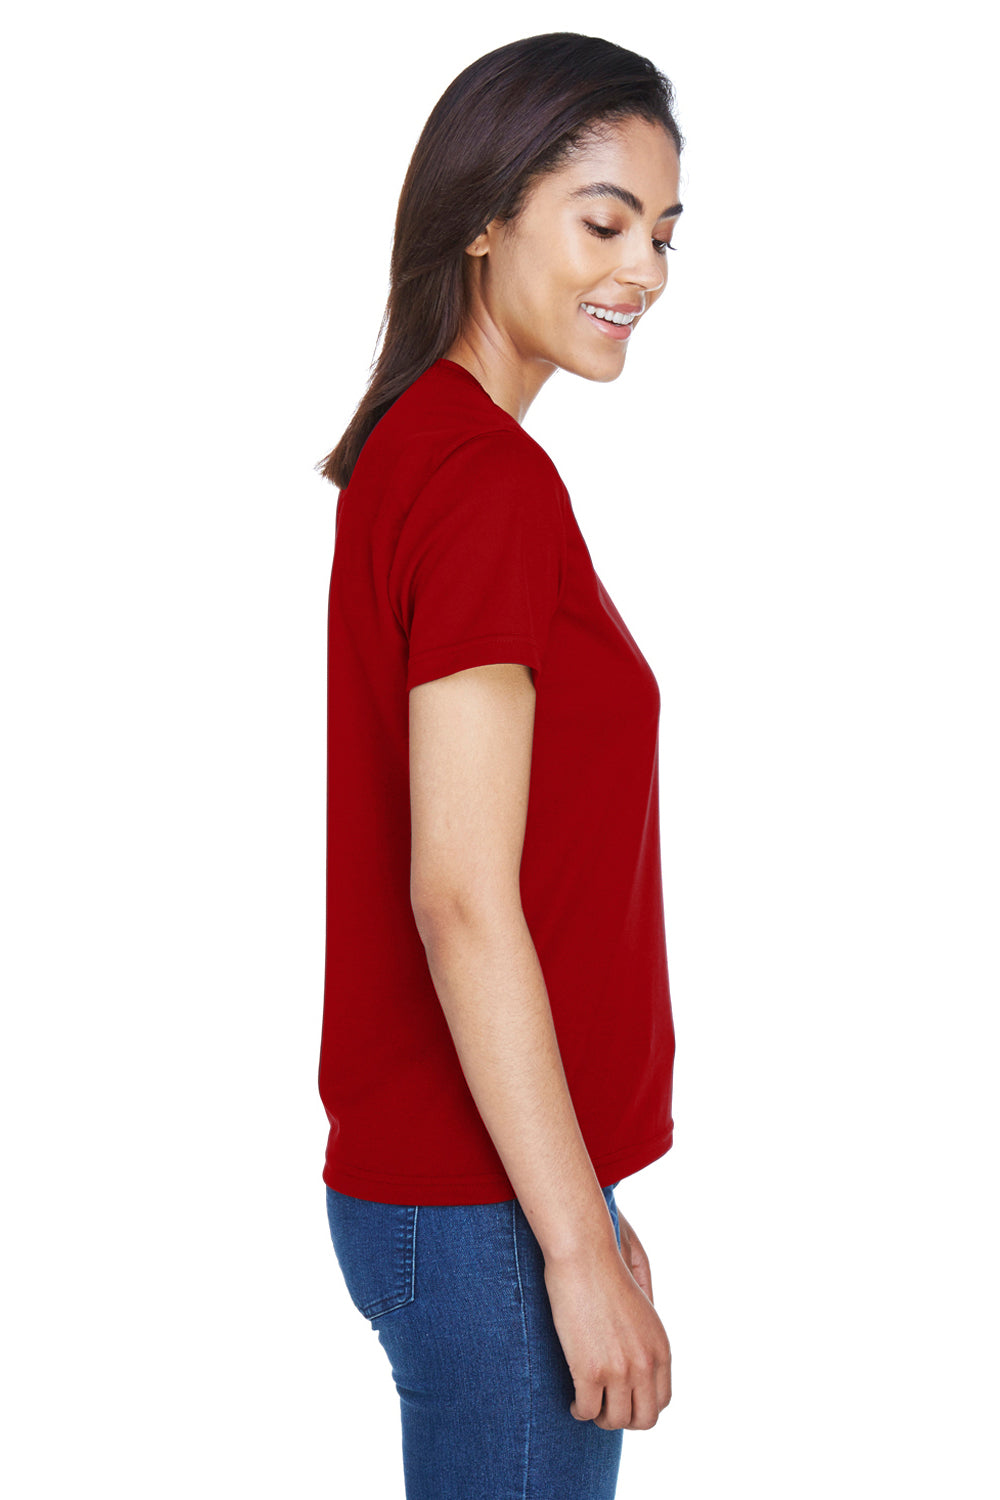 Core 365 78182 Womens Pace Performance Moisture Wicking Short Sleeve Crewneck T-Shirt Red Side